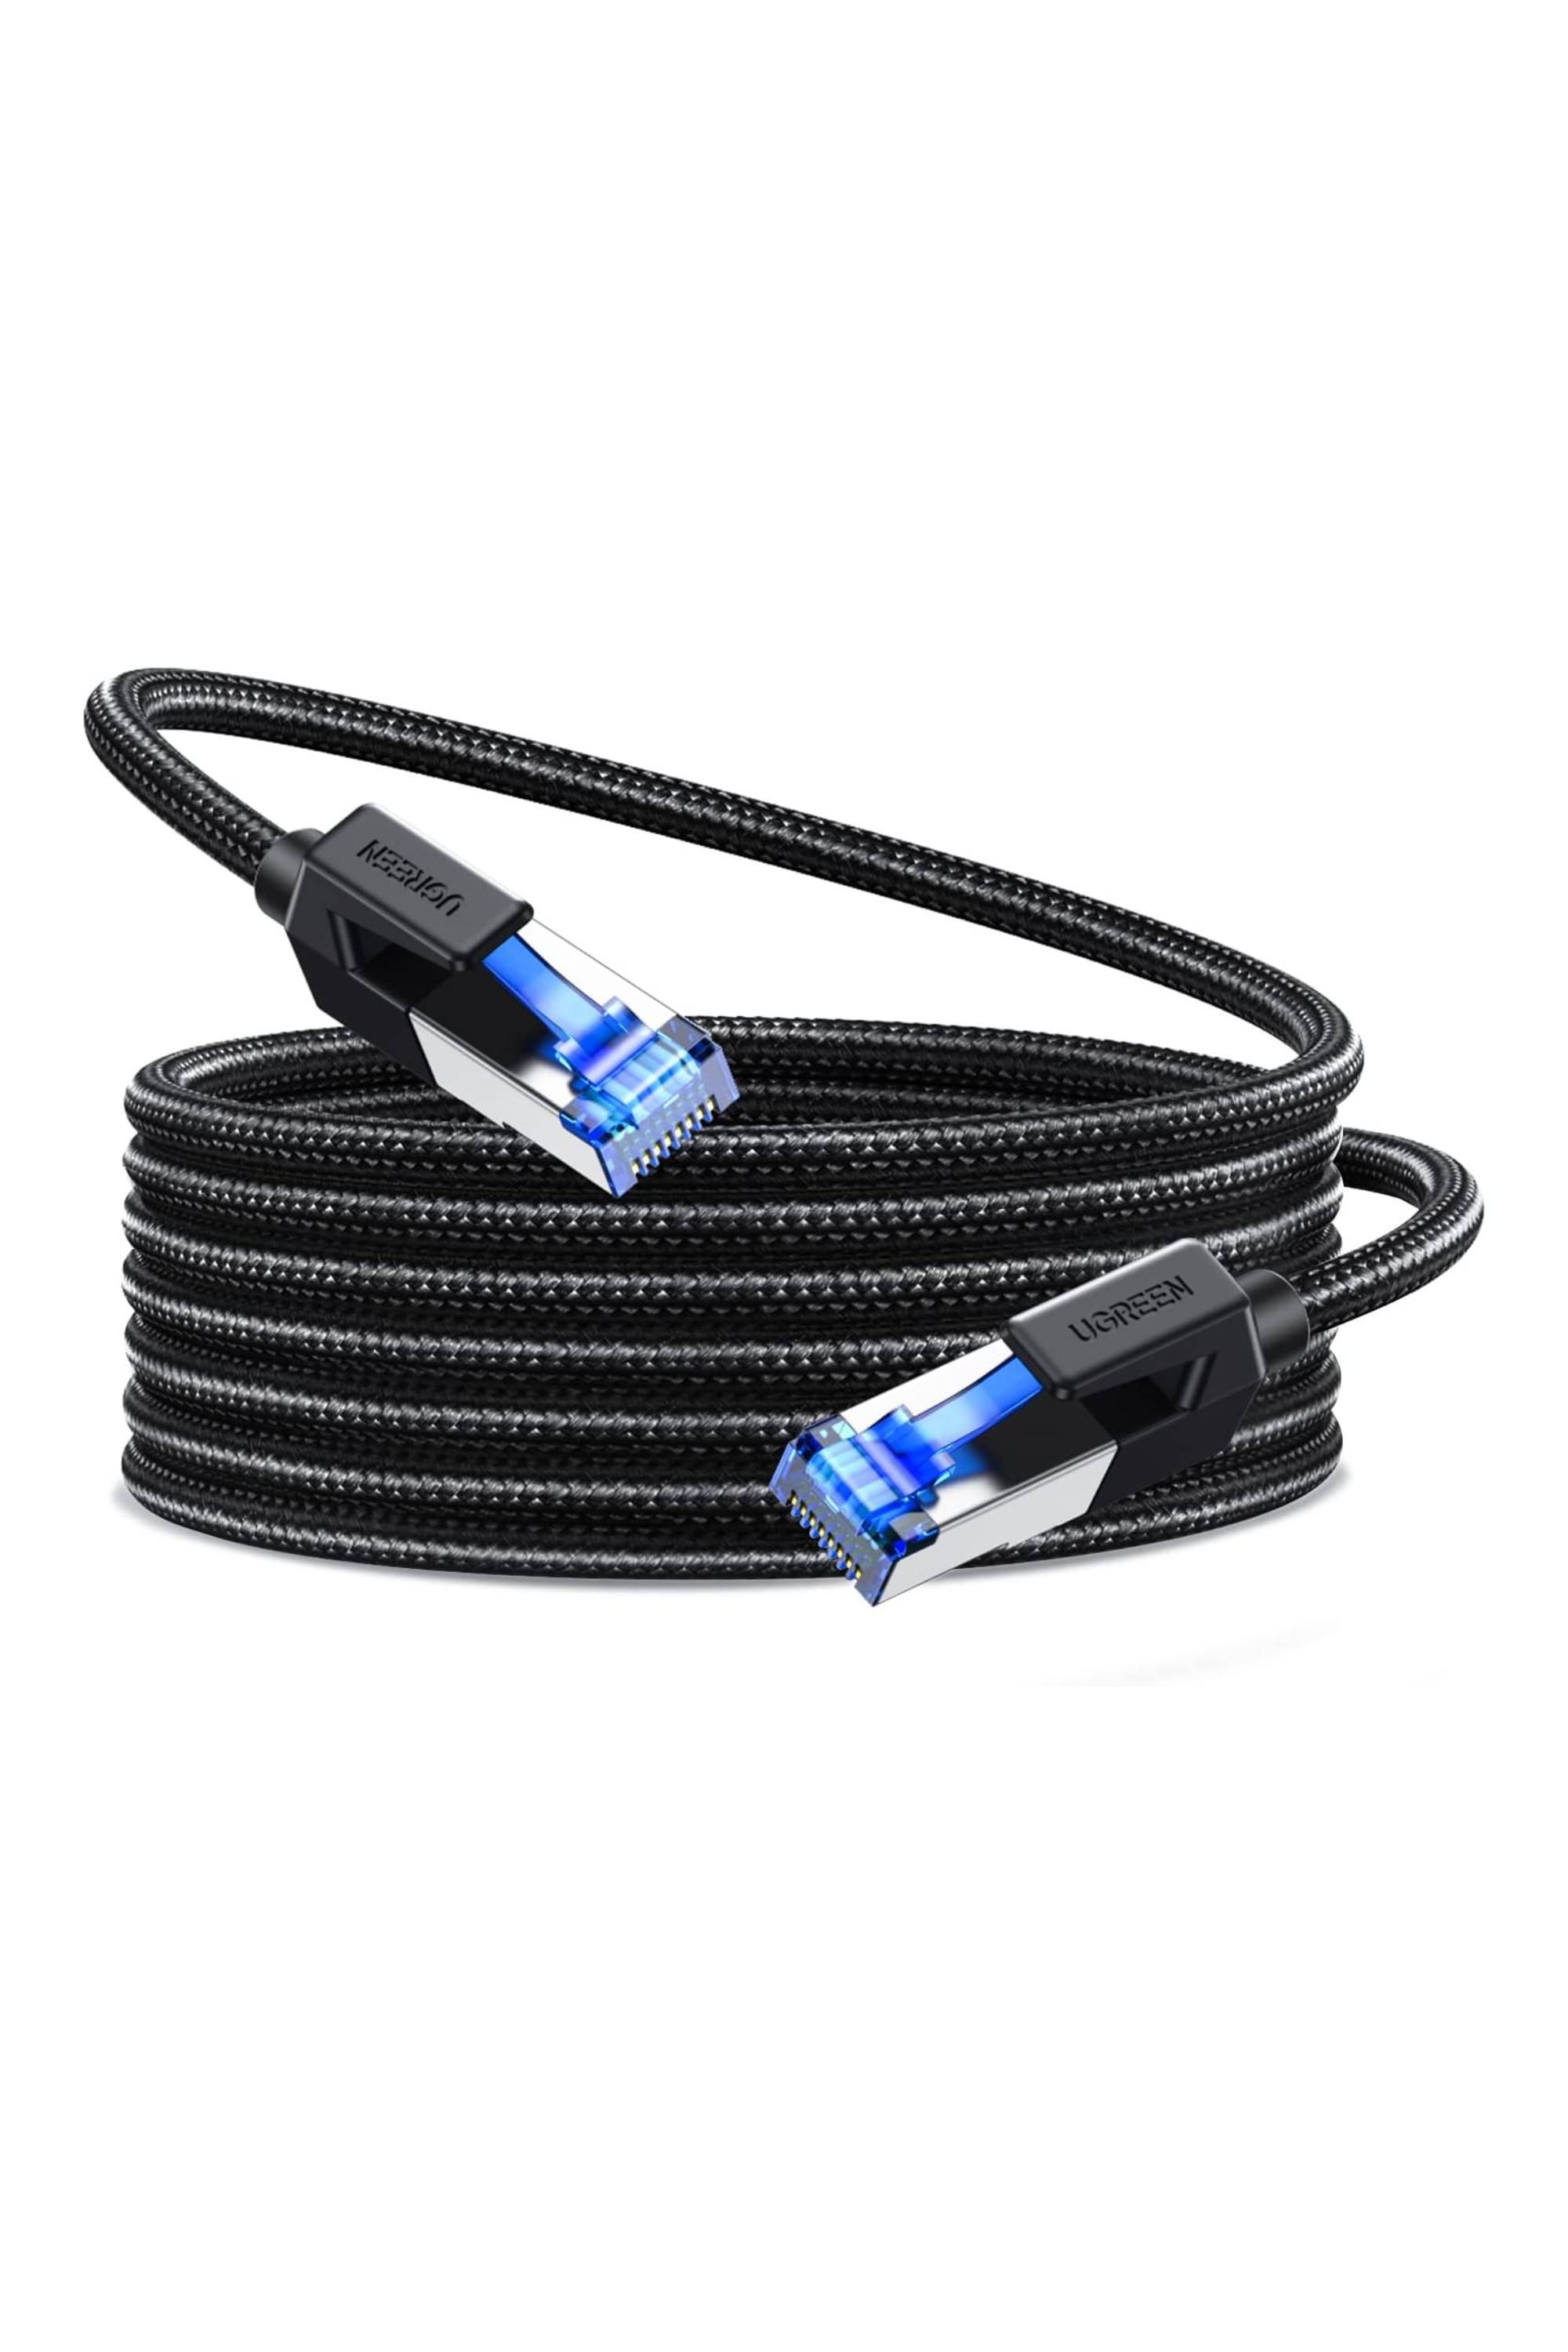 UGREEN 25ft RJ45 Cat 8 Braided Ethernet Patch Cable